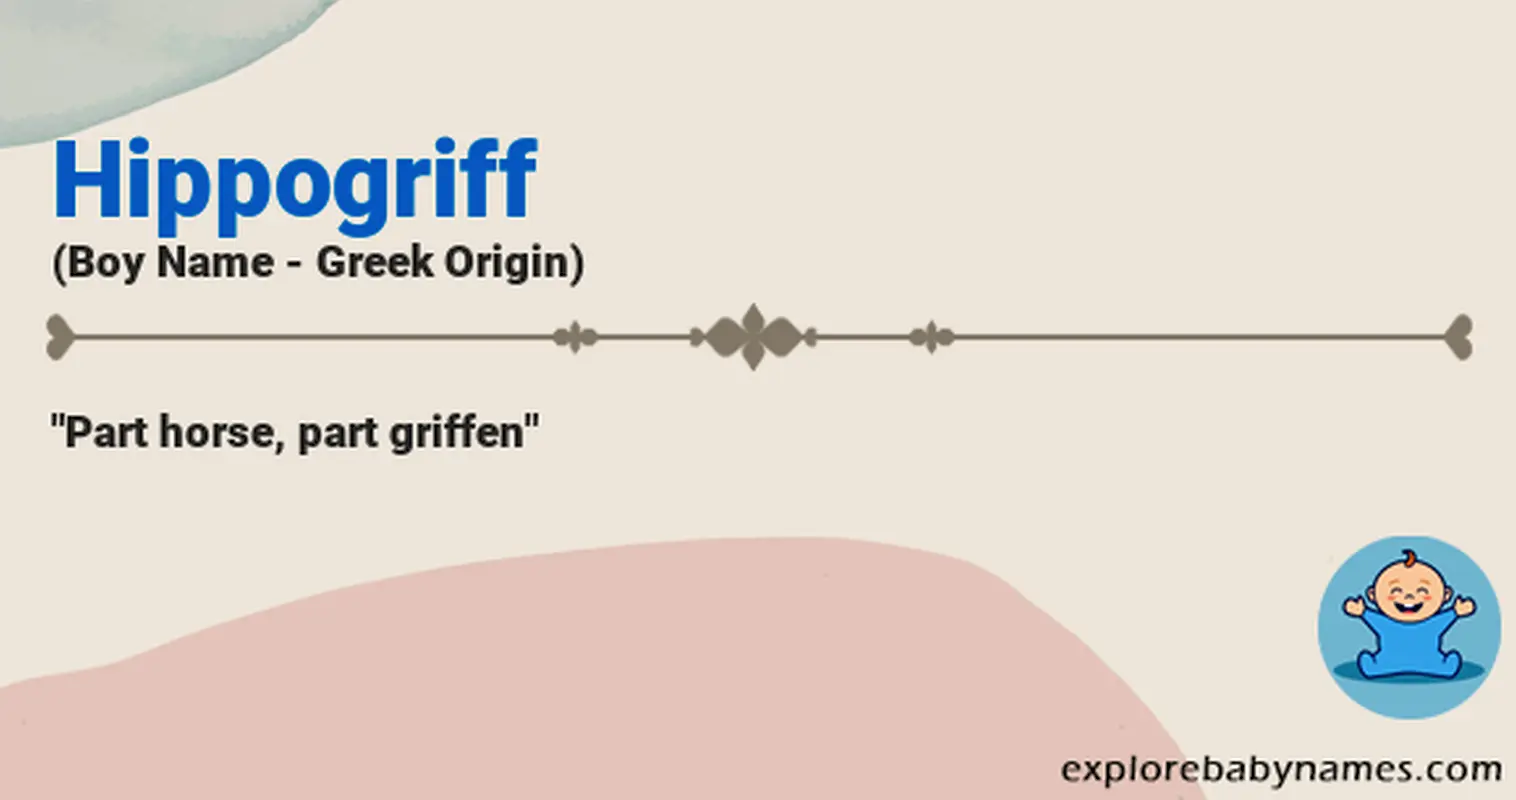 Meaning of Hippogriff